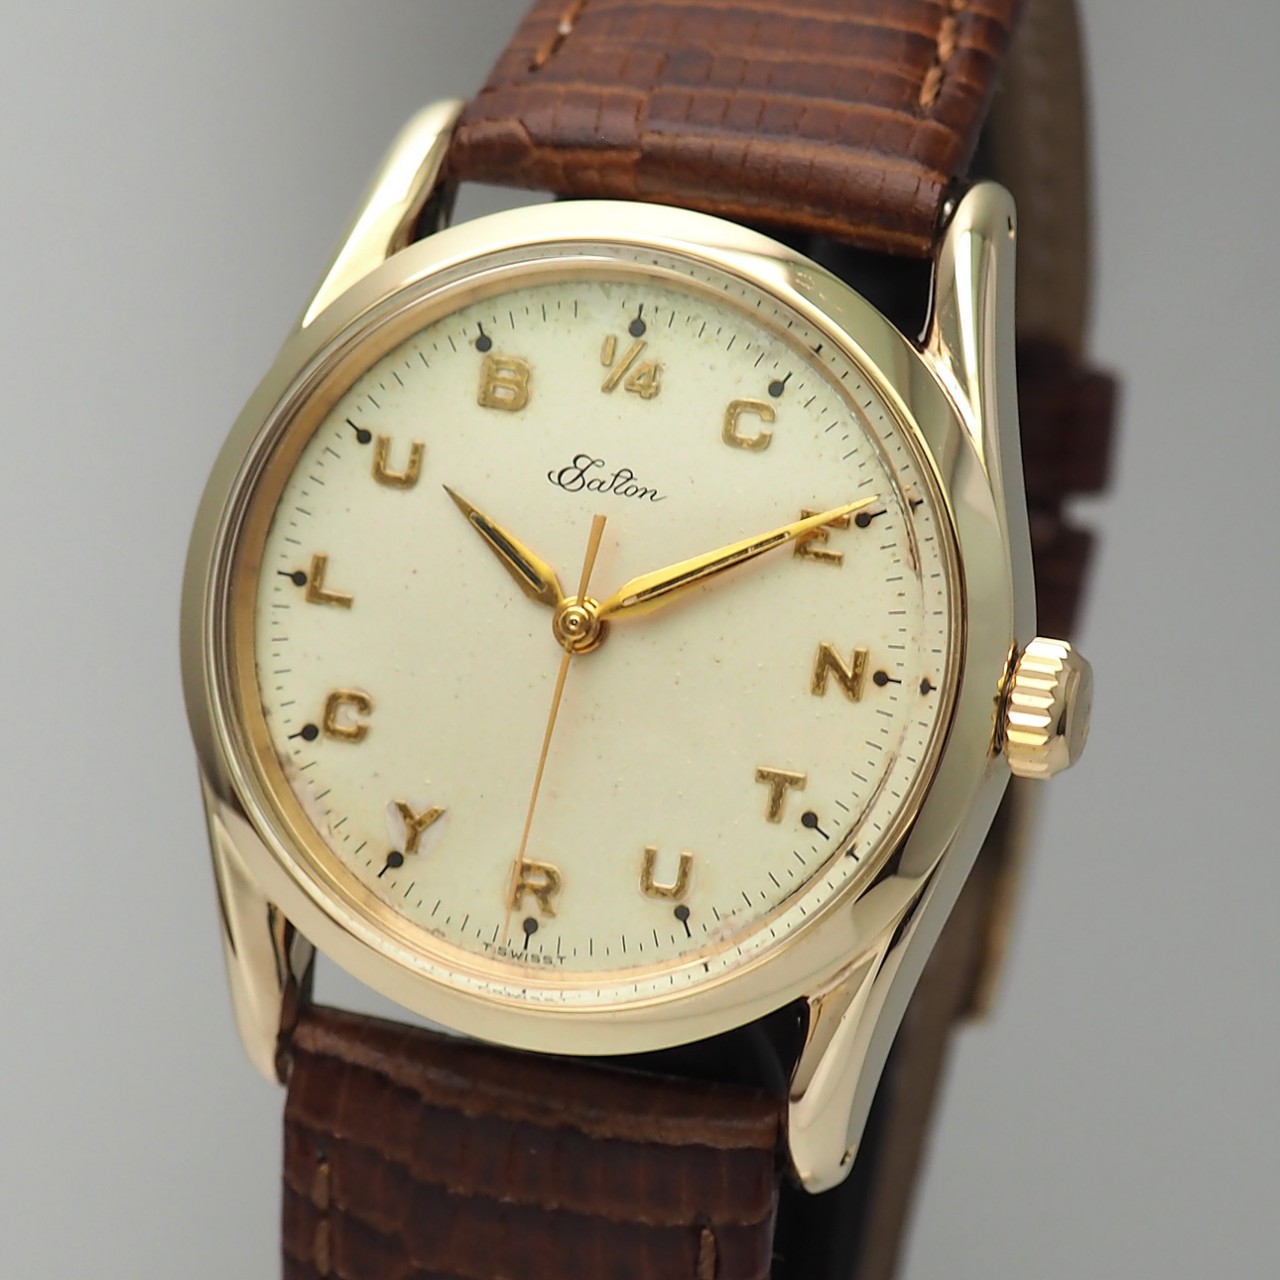 Rolex Oyster Perpetual ‘Eaton Century’ 14K/585, Ref: 1011